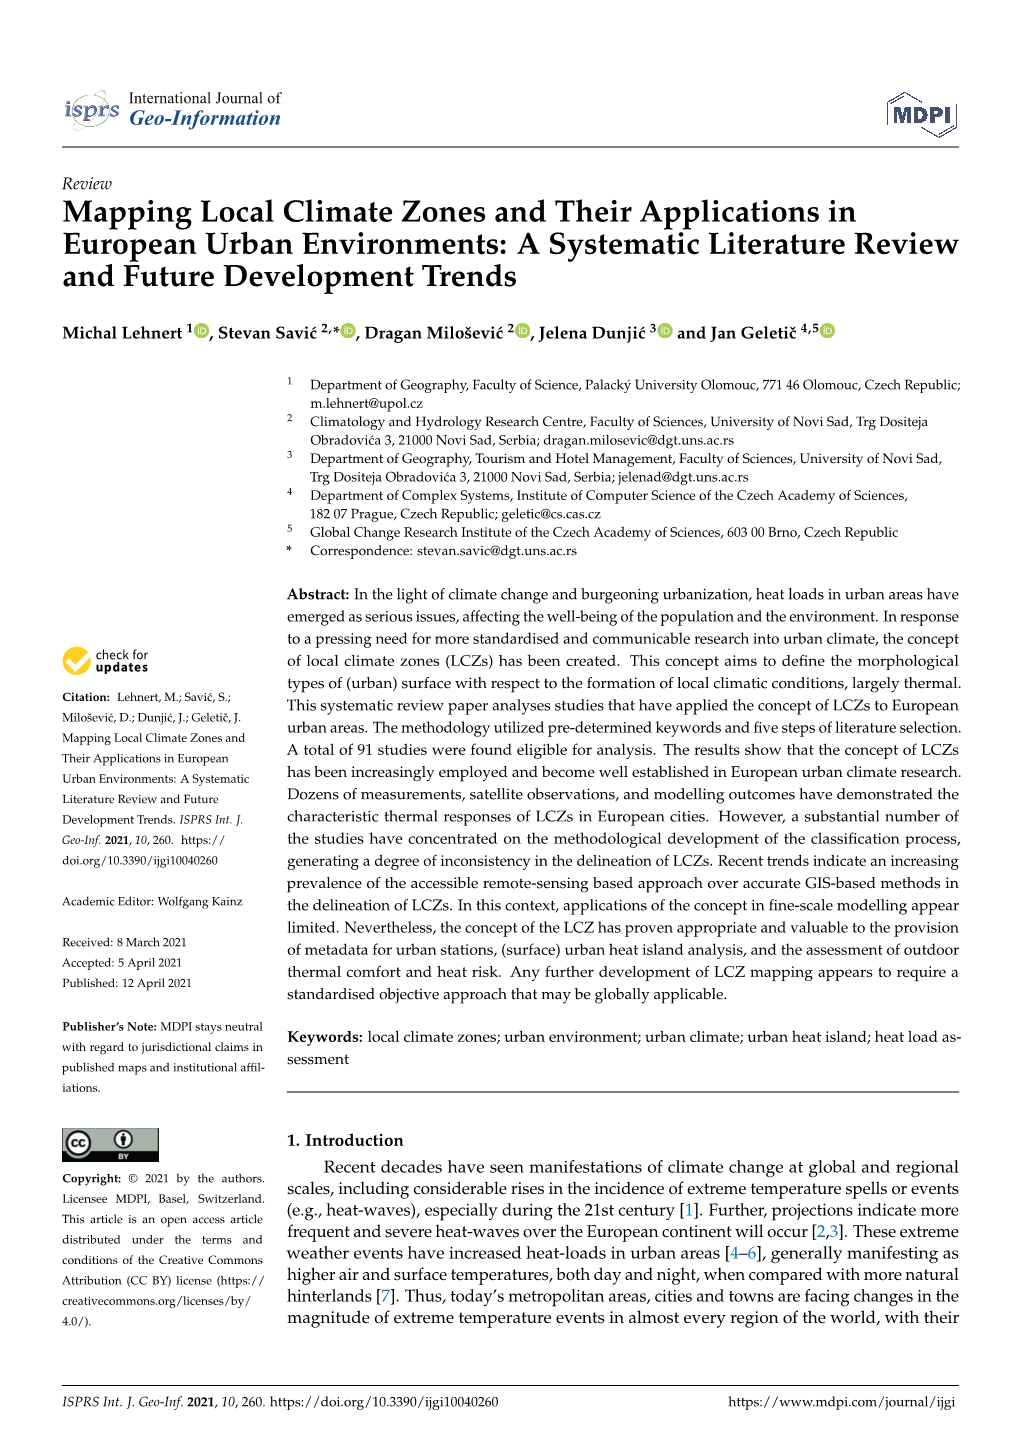 Mapping Local Climate Zones and Their Applications in European Urban Environments: a Systematic Literature Review and Future Development Trends